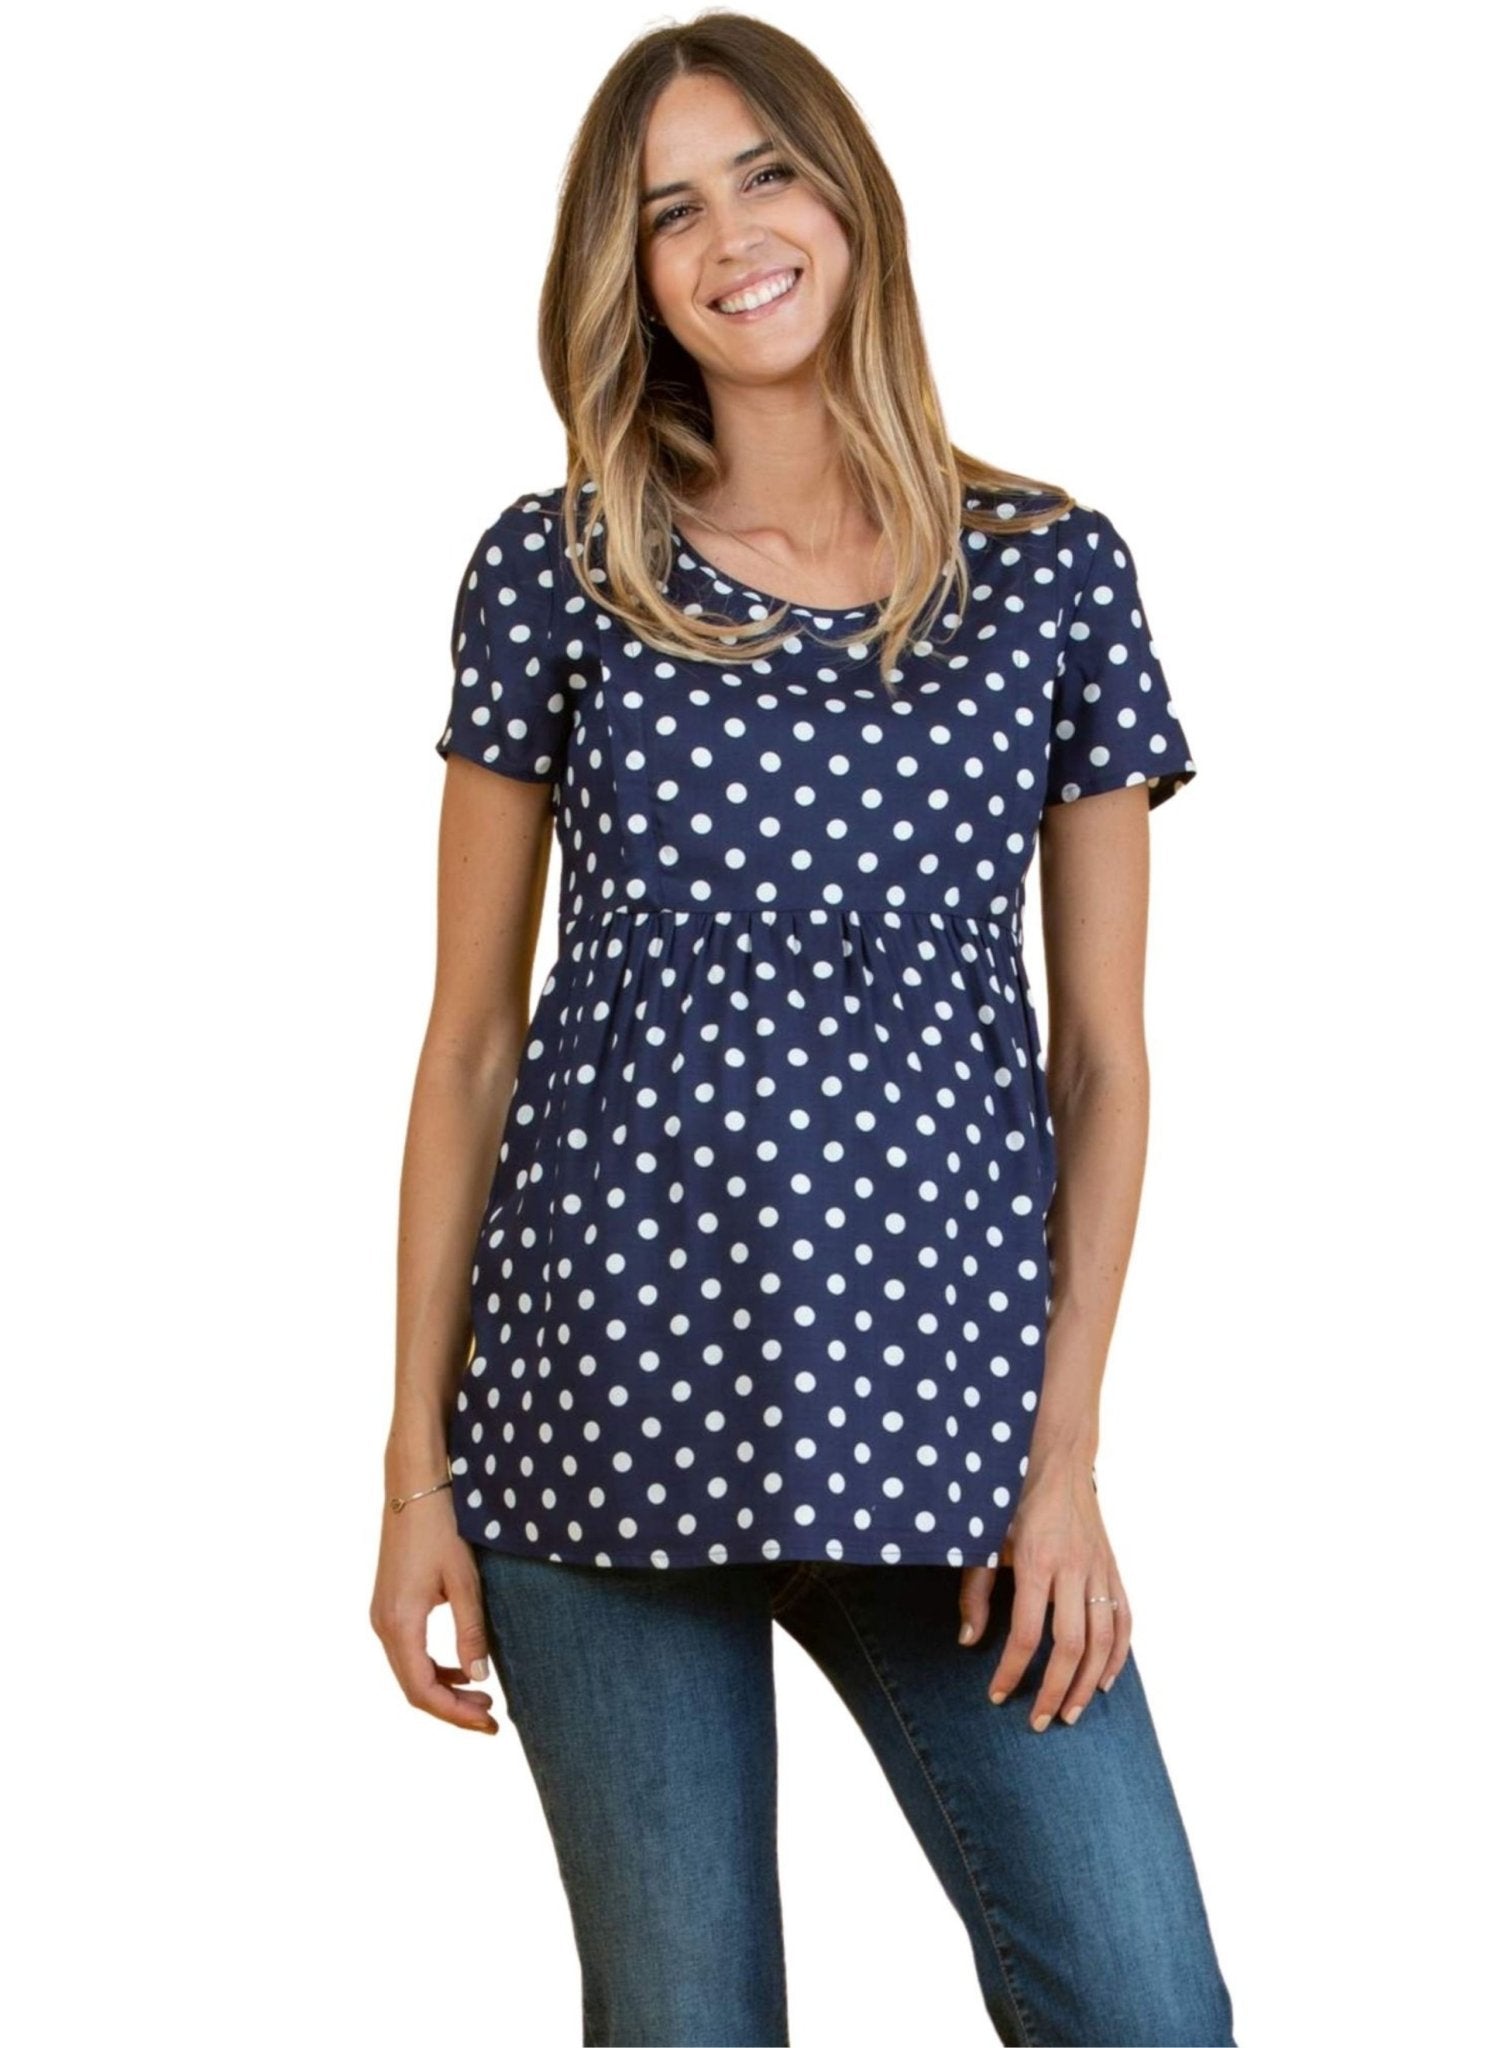 Polka Dot Printed Maternity Blouse with Gathering - Mums and Bumps